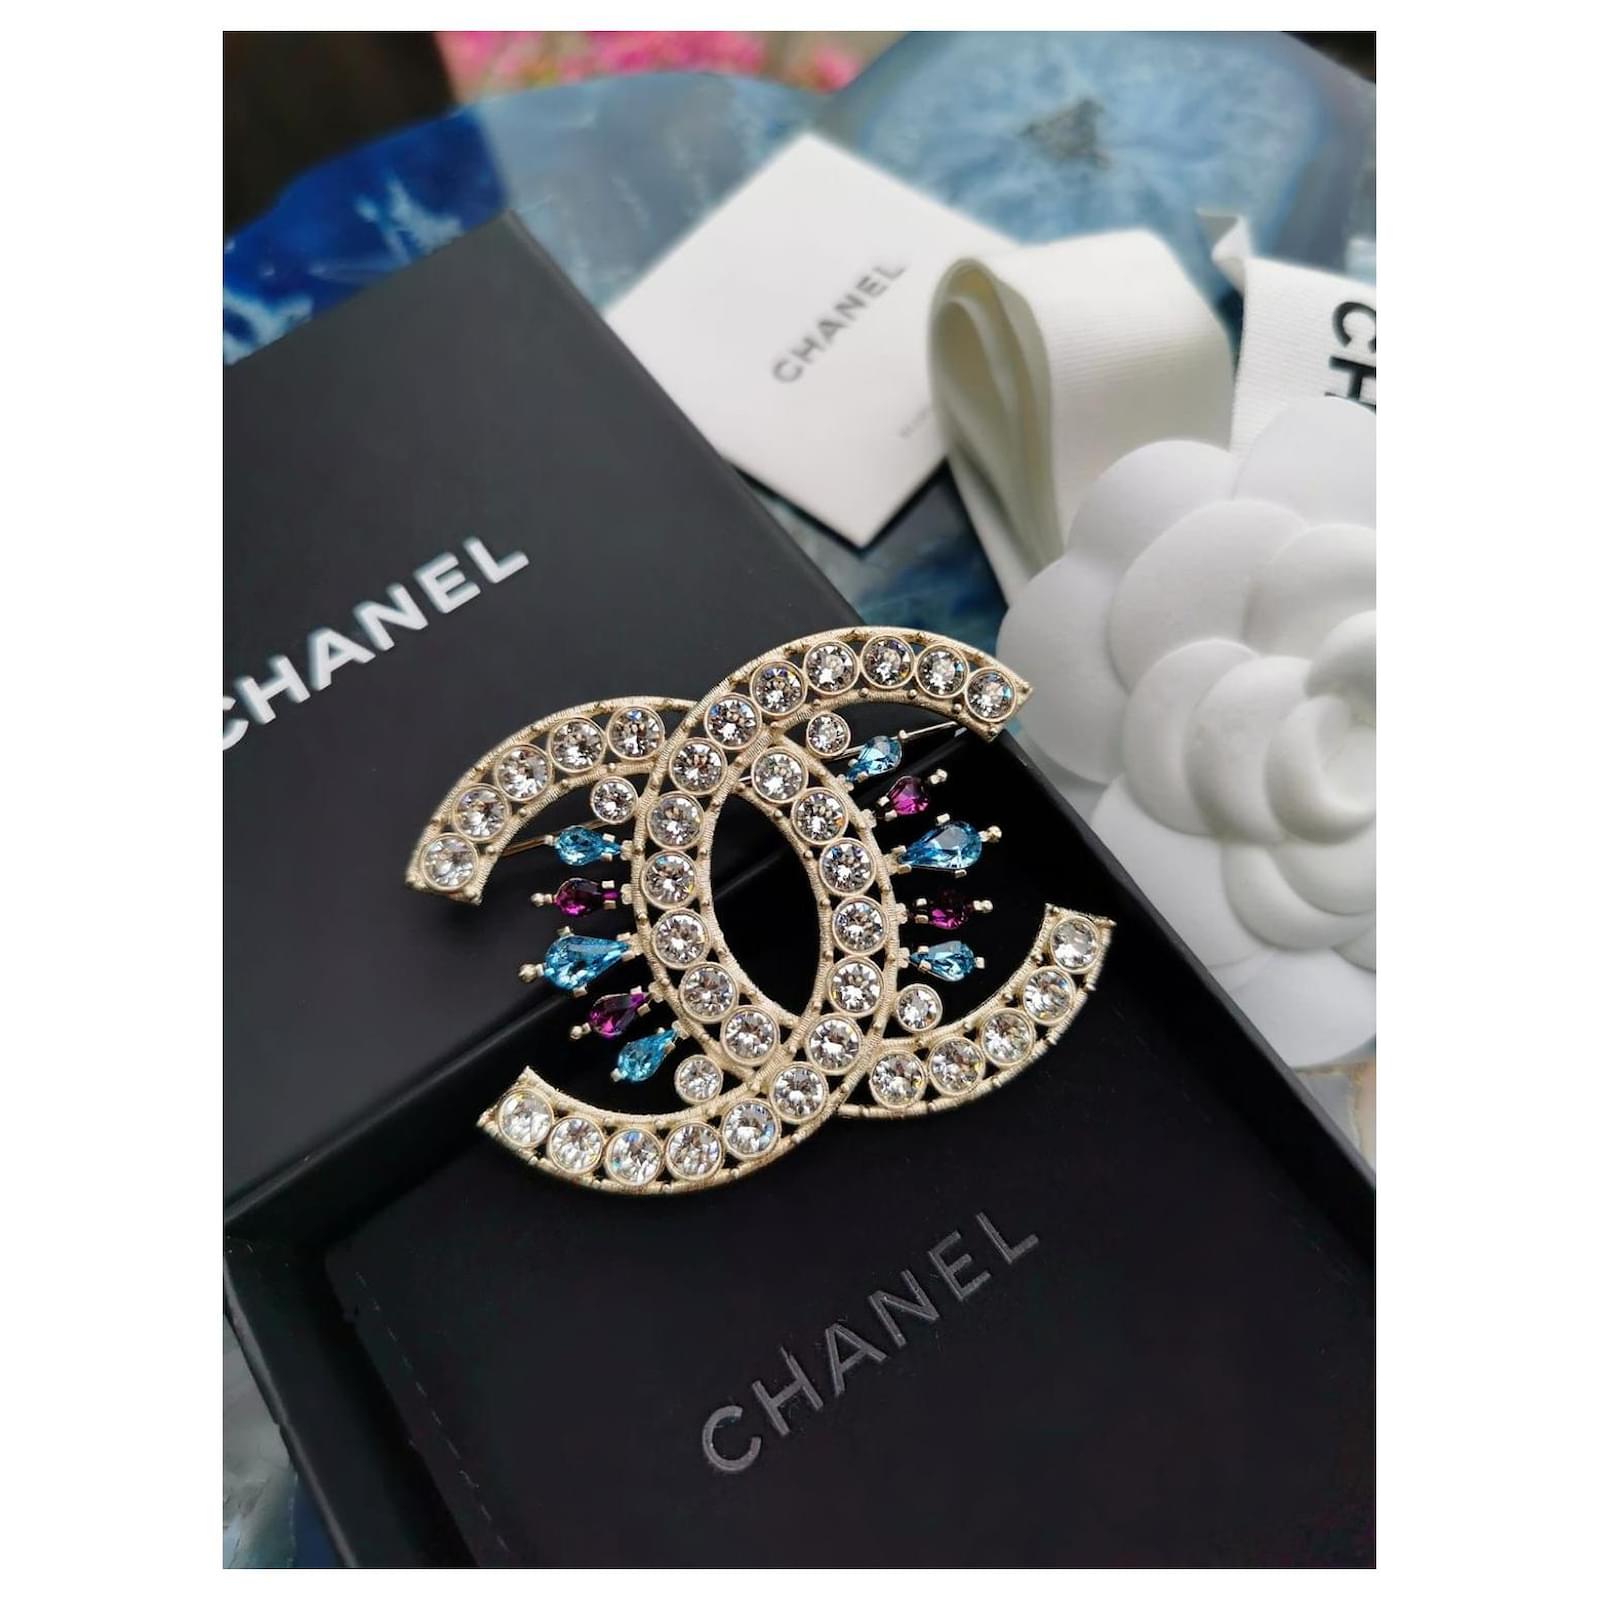 CHANEL Brooch Pin A22K AB9679 Gold Plated Leather Black Gold Used Women CC  COCO